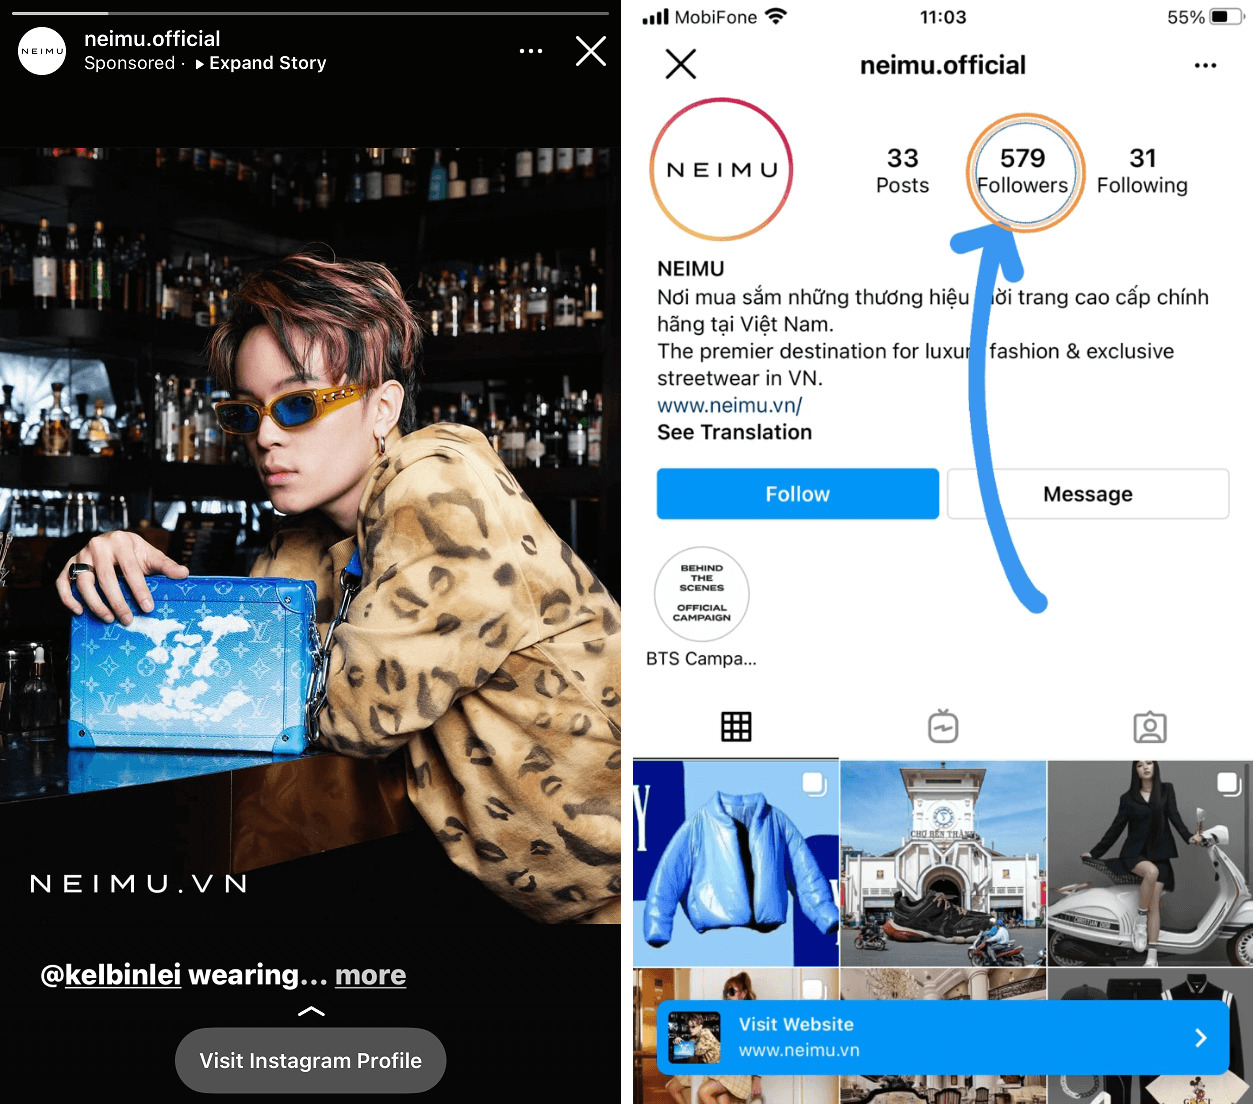 This fashion store only has approximately 600 followers but they can still use the swipe-up feature